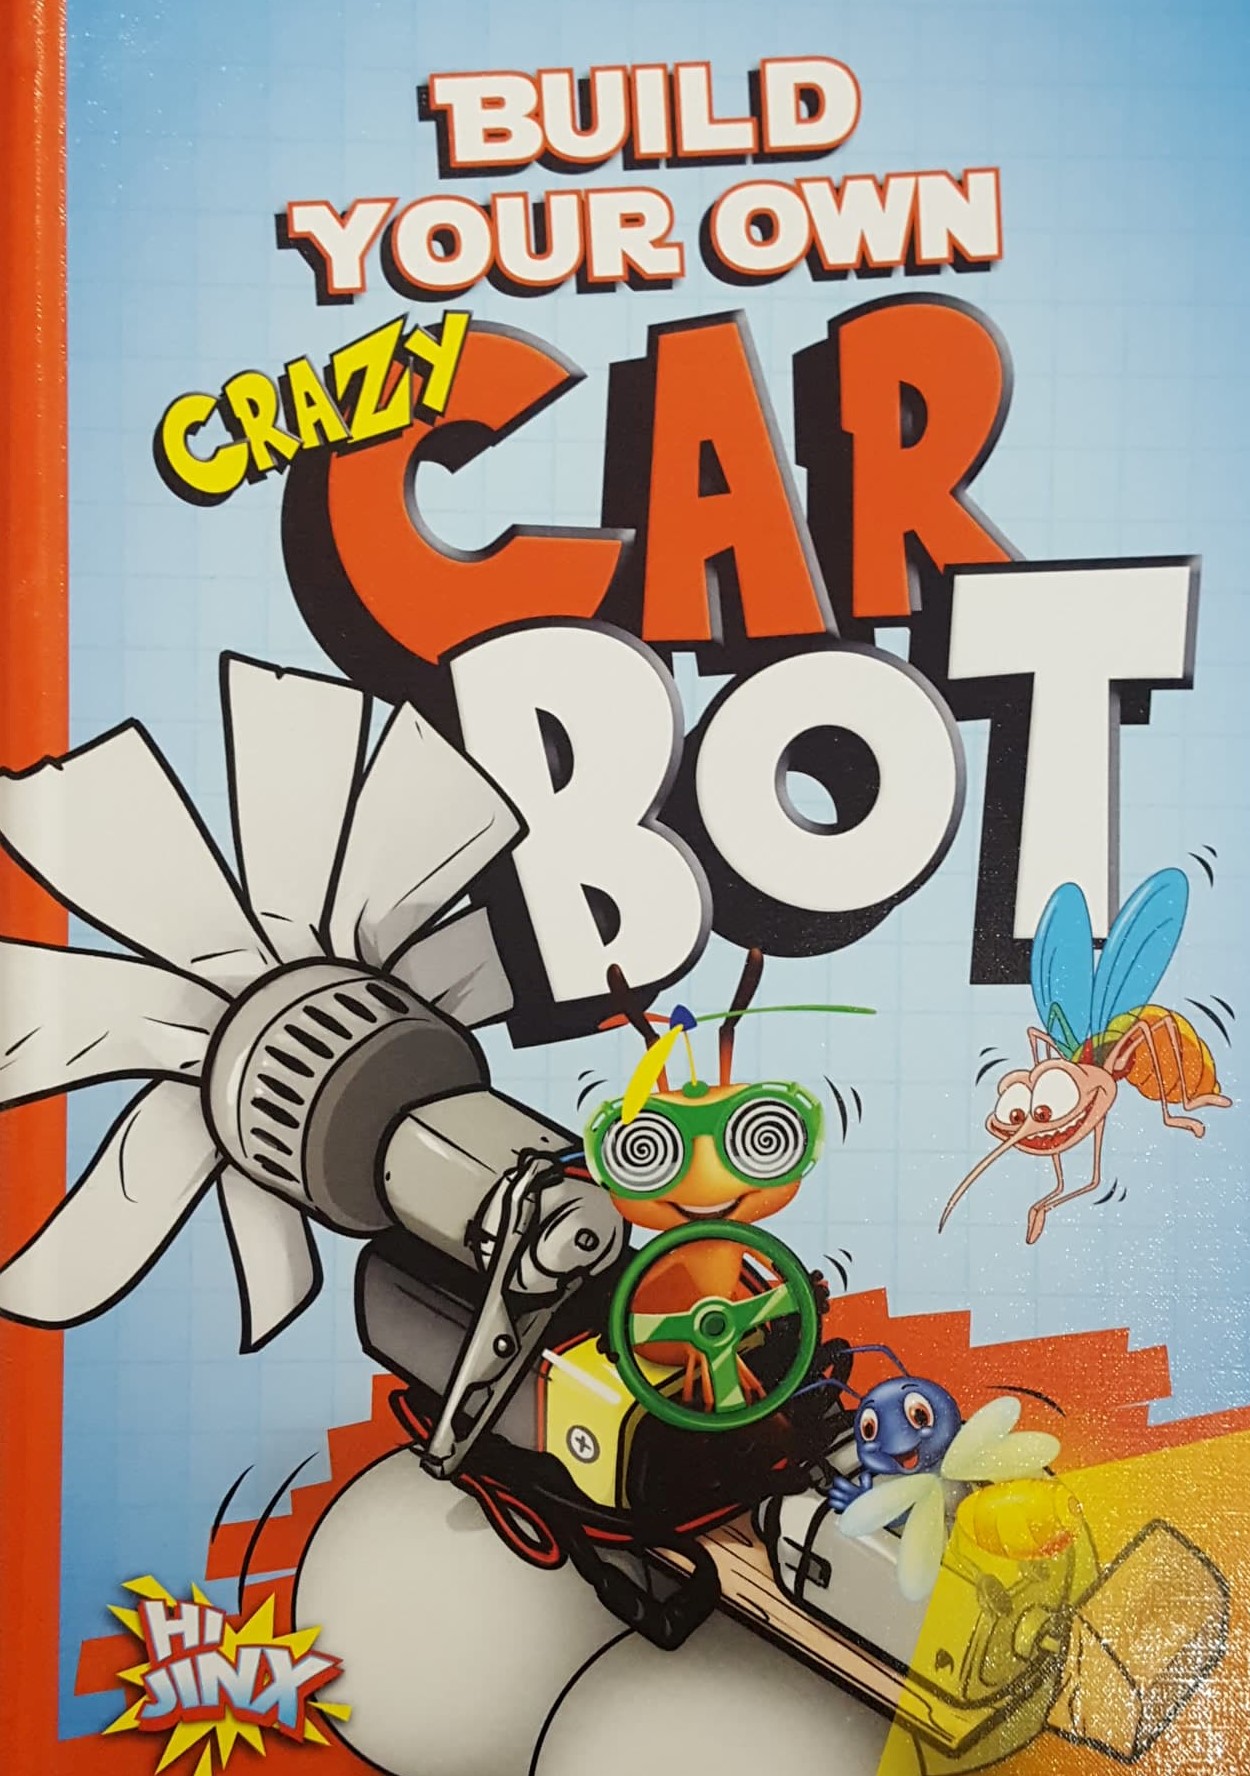 Build your own crazy car bot